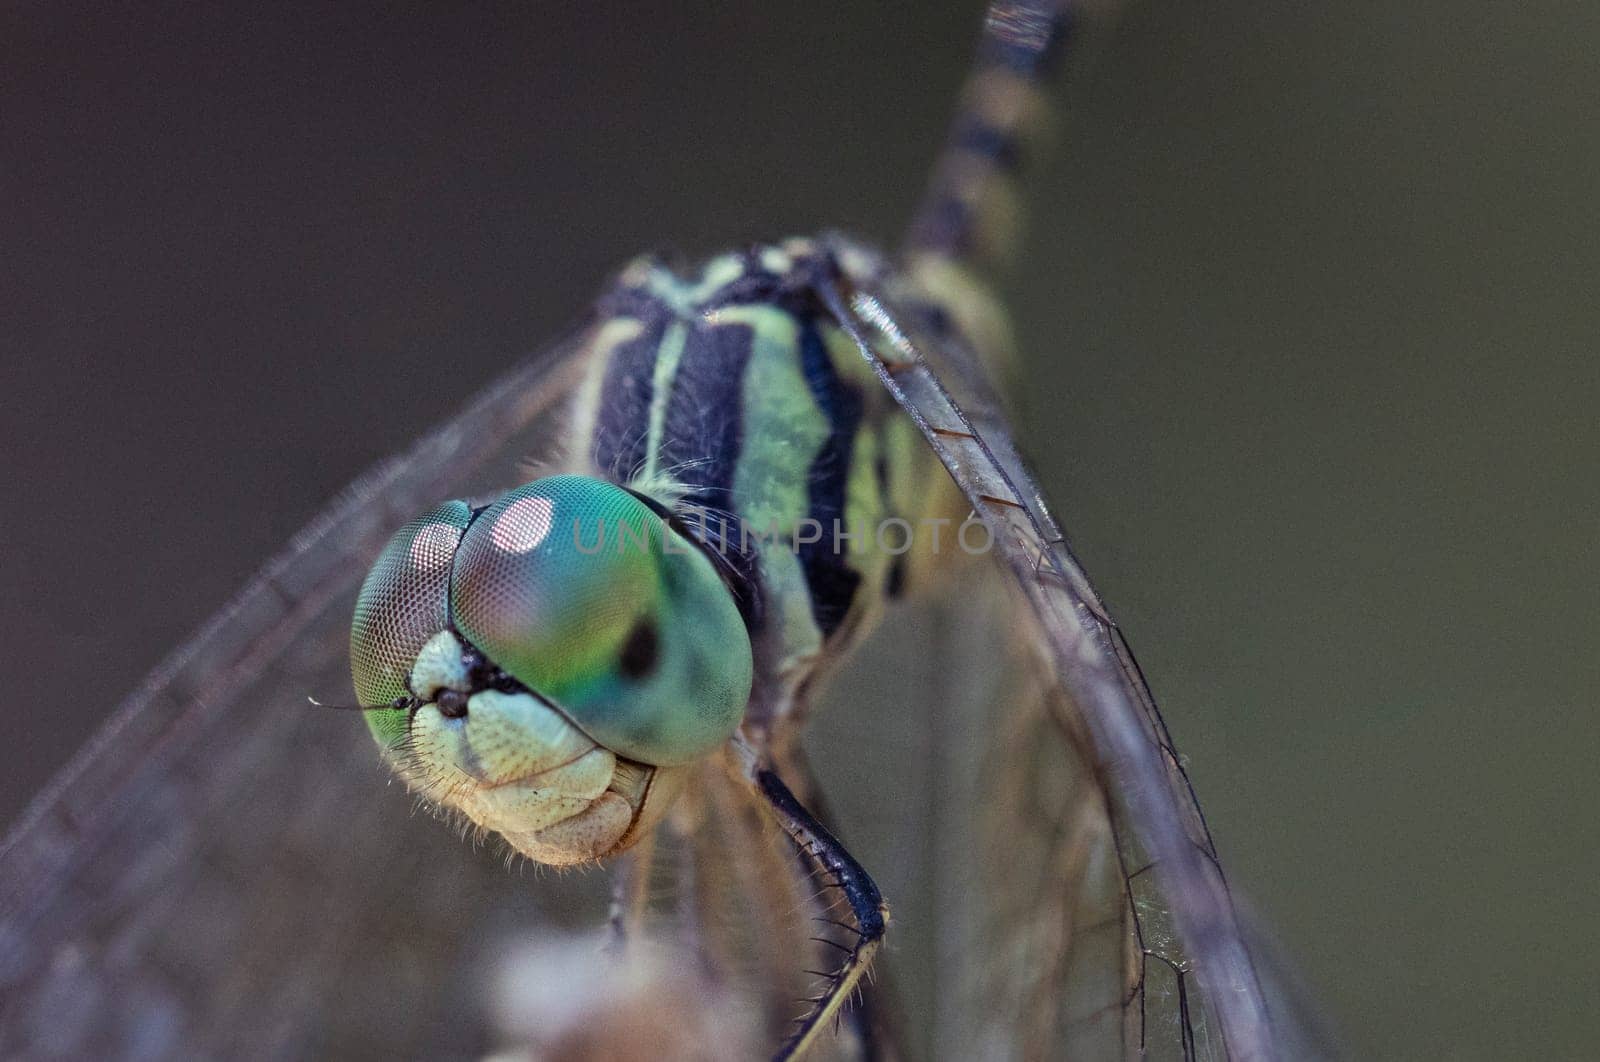 Macro close up, focus stacked shot of a yellow, green and black dragonfly by StefanMal